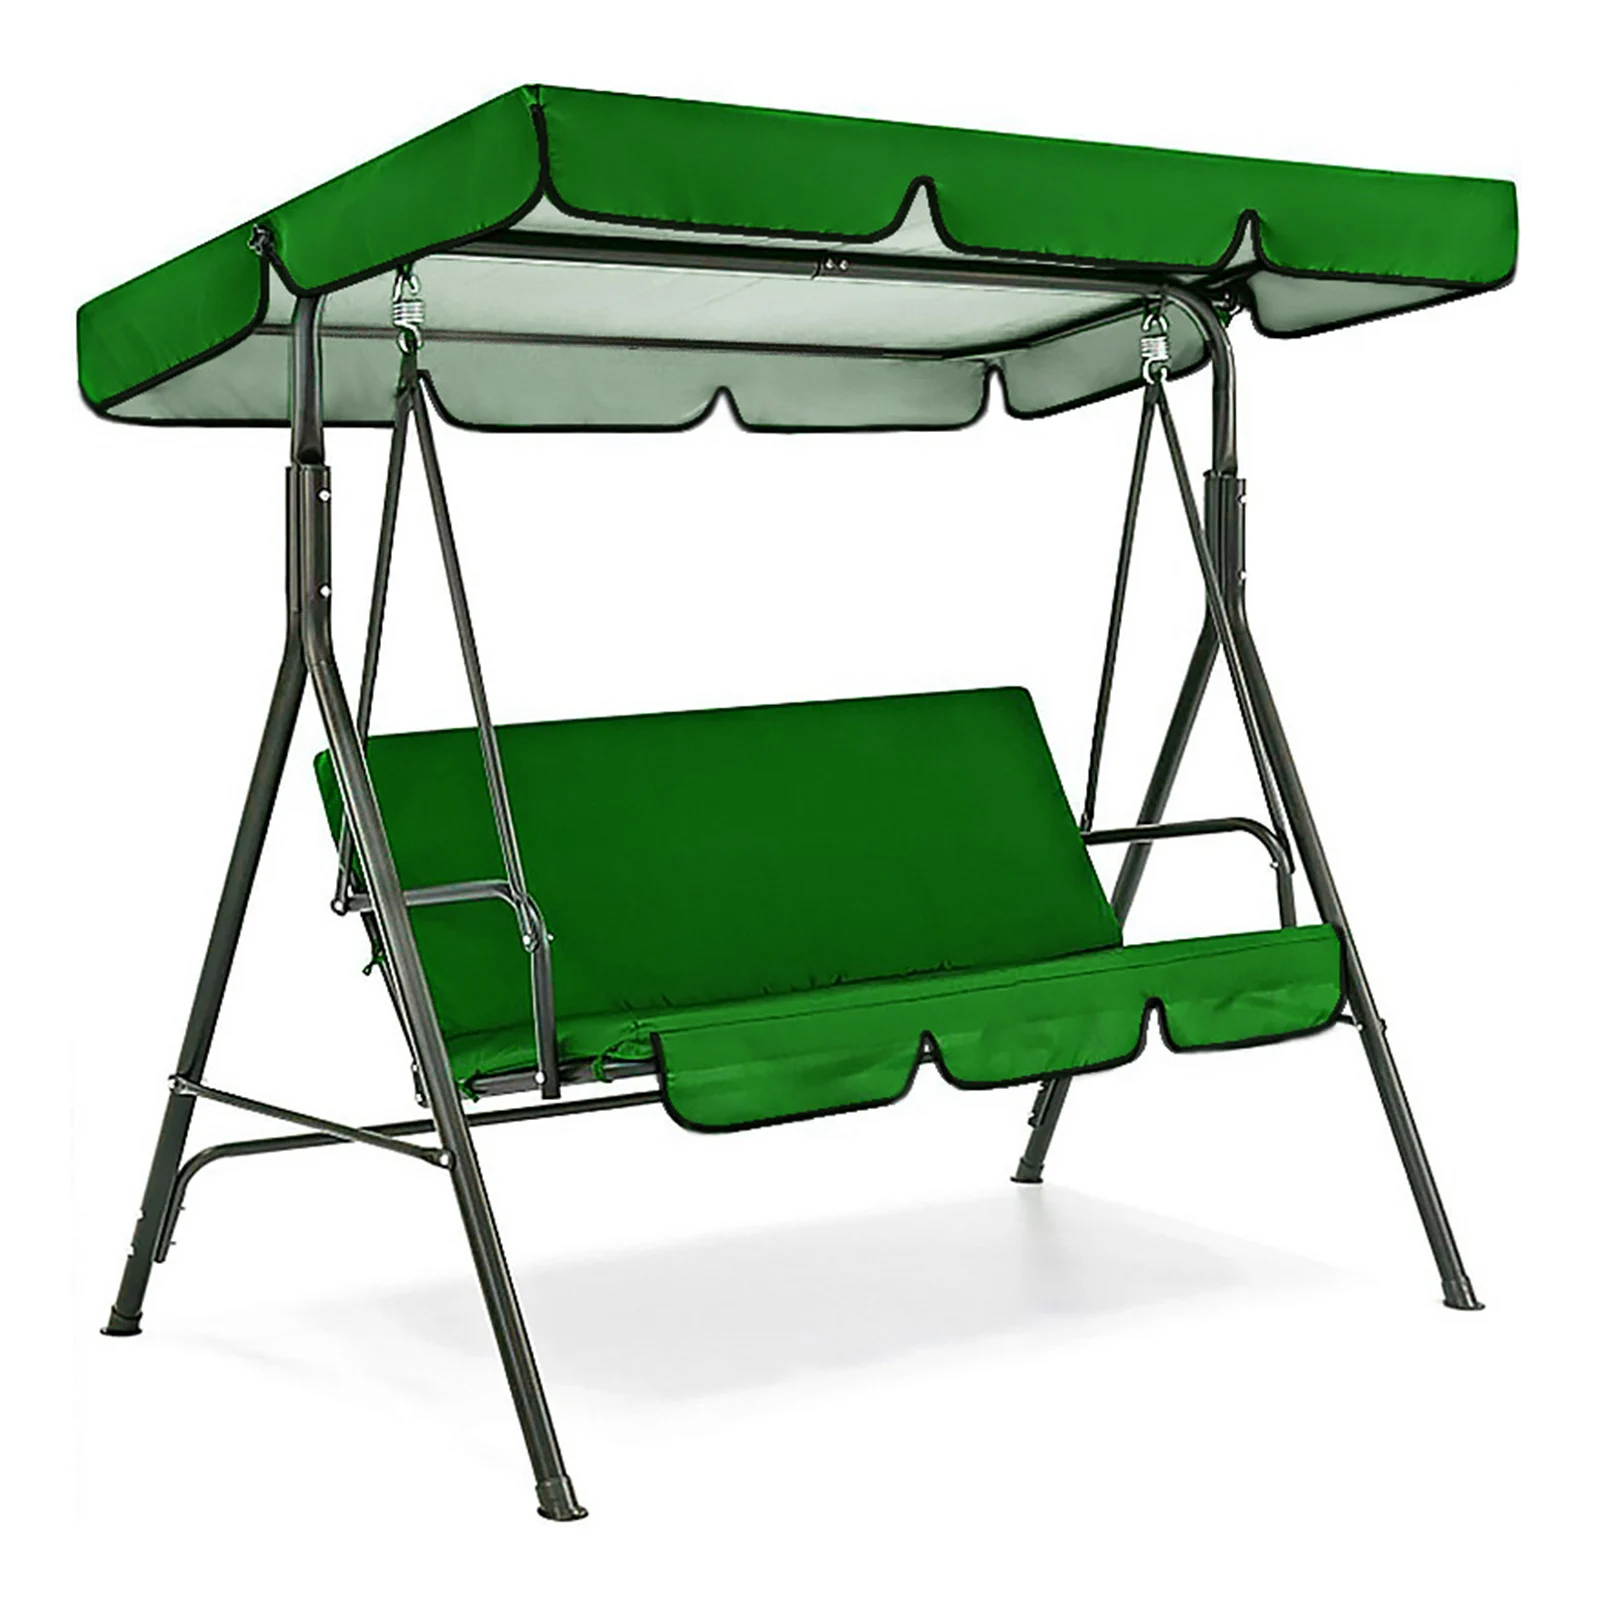 Swing Canopy Awning Set Waterproof Yard Swing Cushion Cover 3 Person Swing Seat Cover Kit for Garden 3 Seat Swing Chair